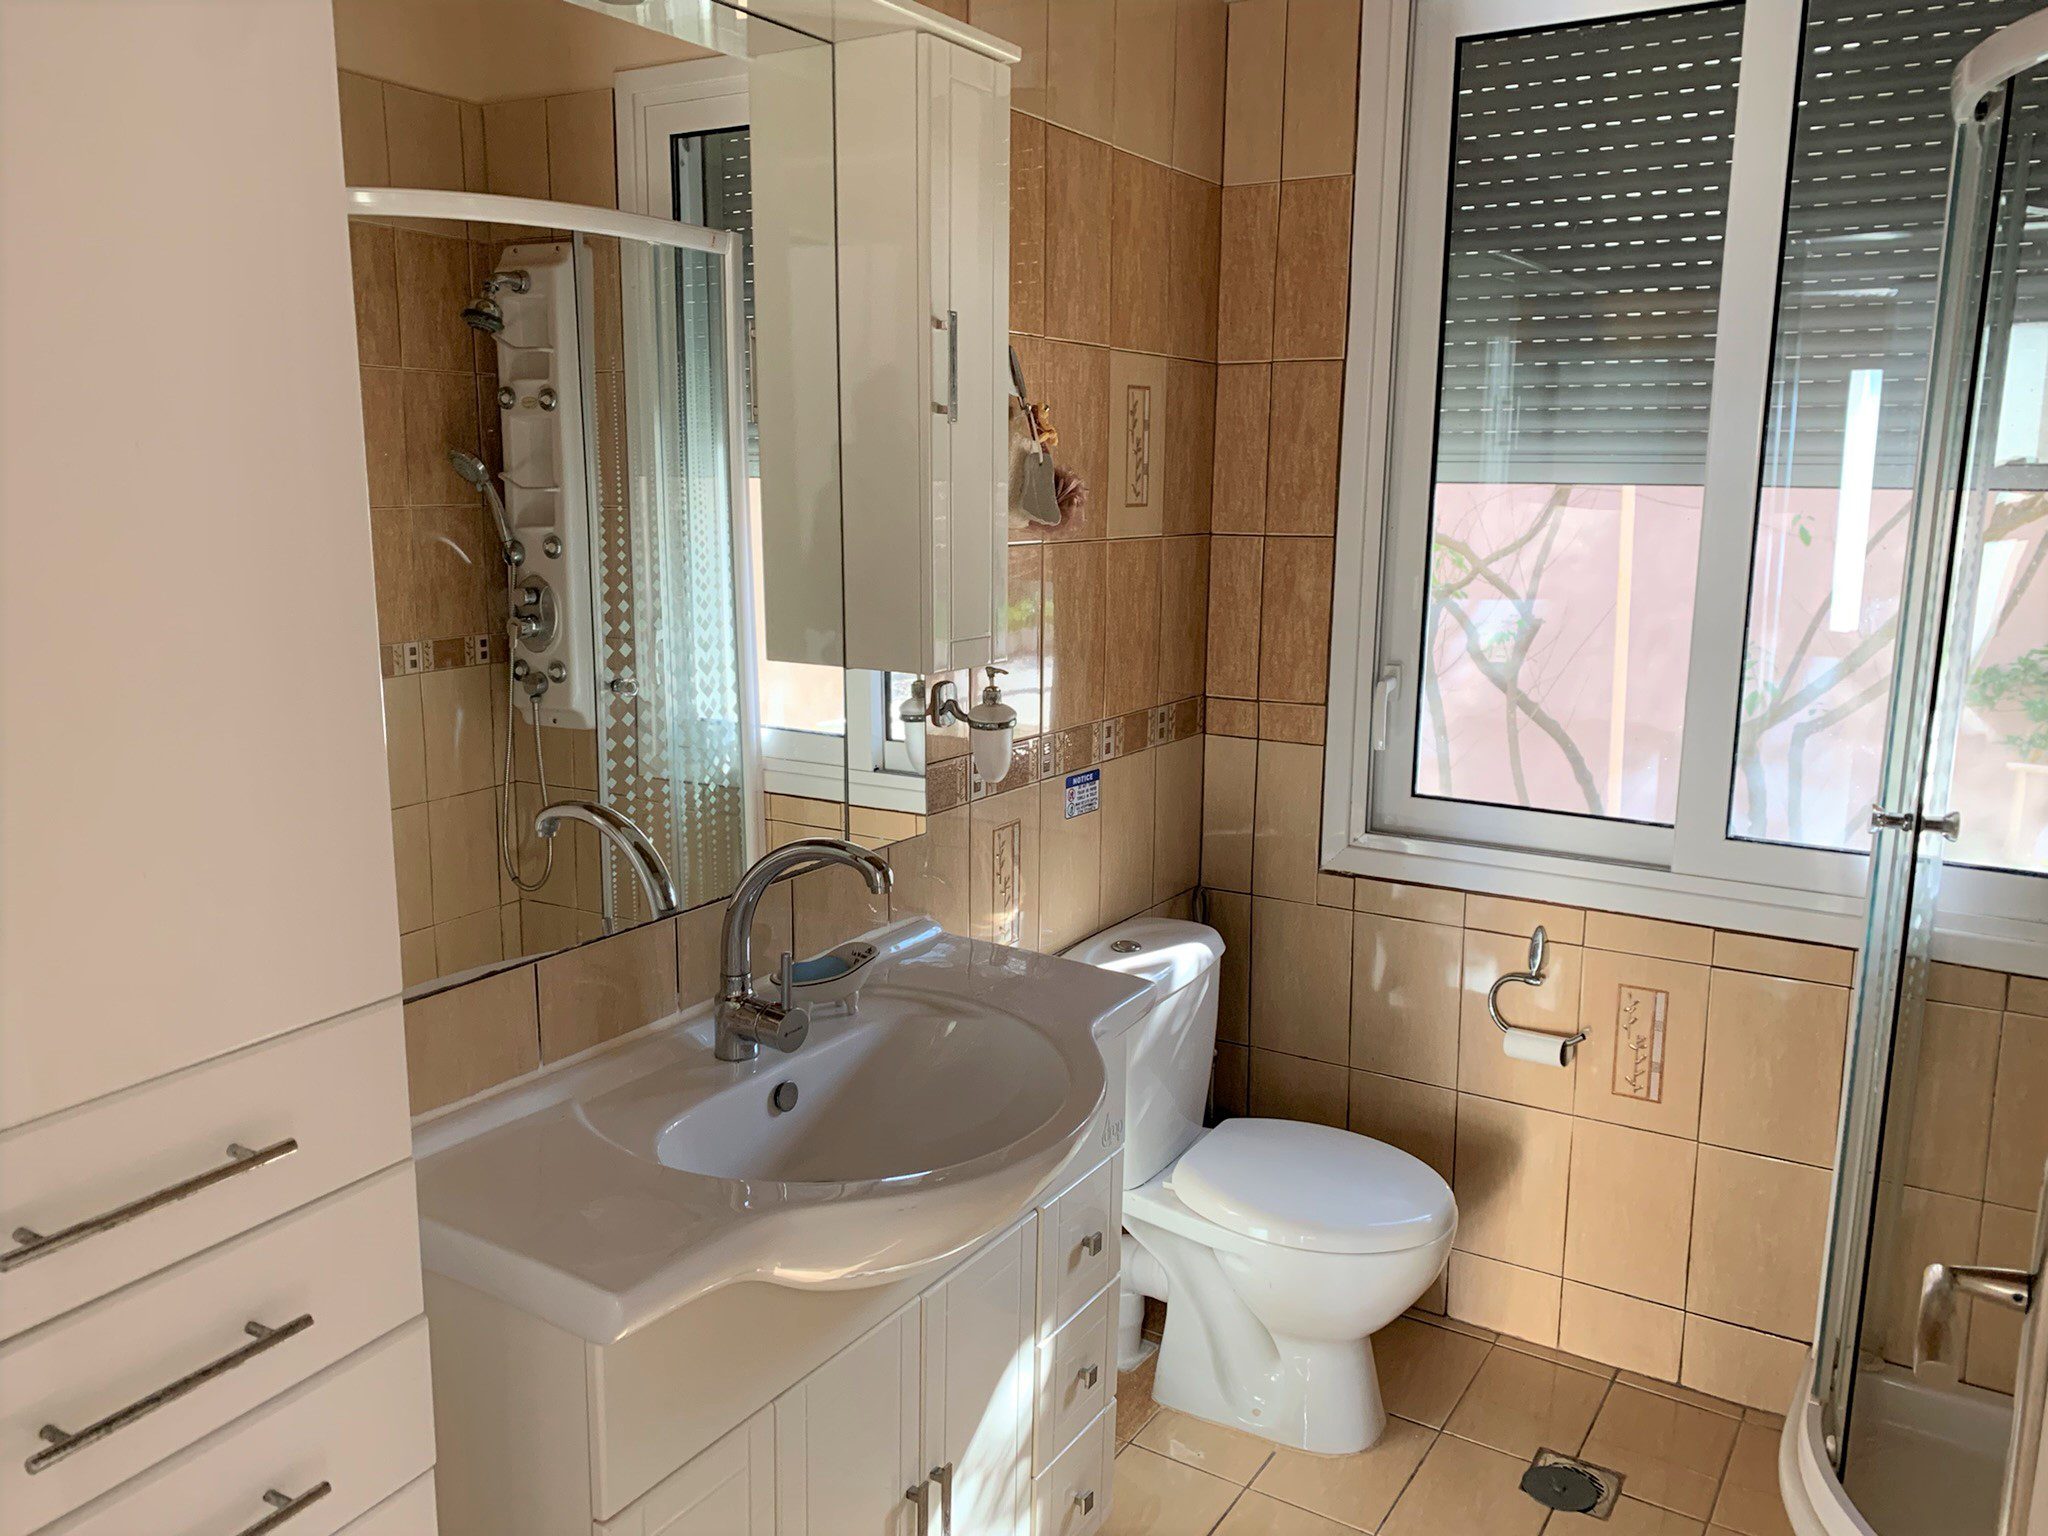 Bathroom of house for rent in Ithaca Greece, Vathi